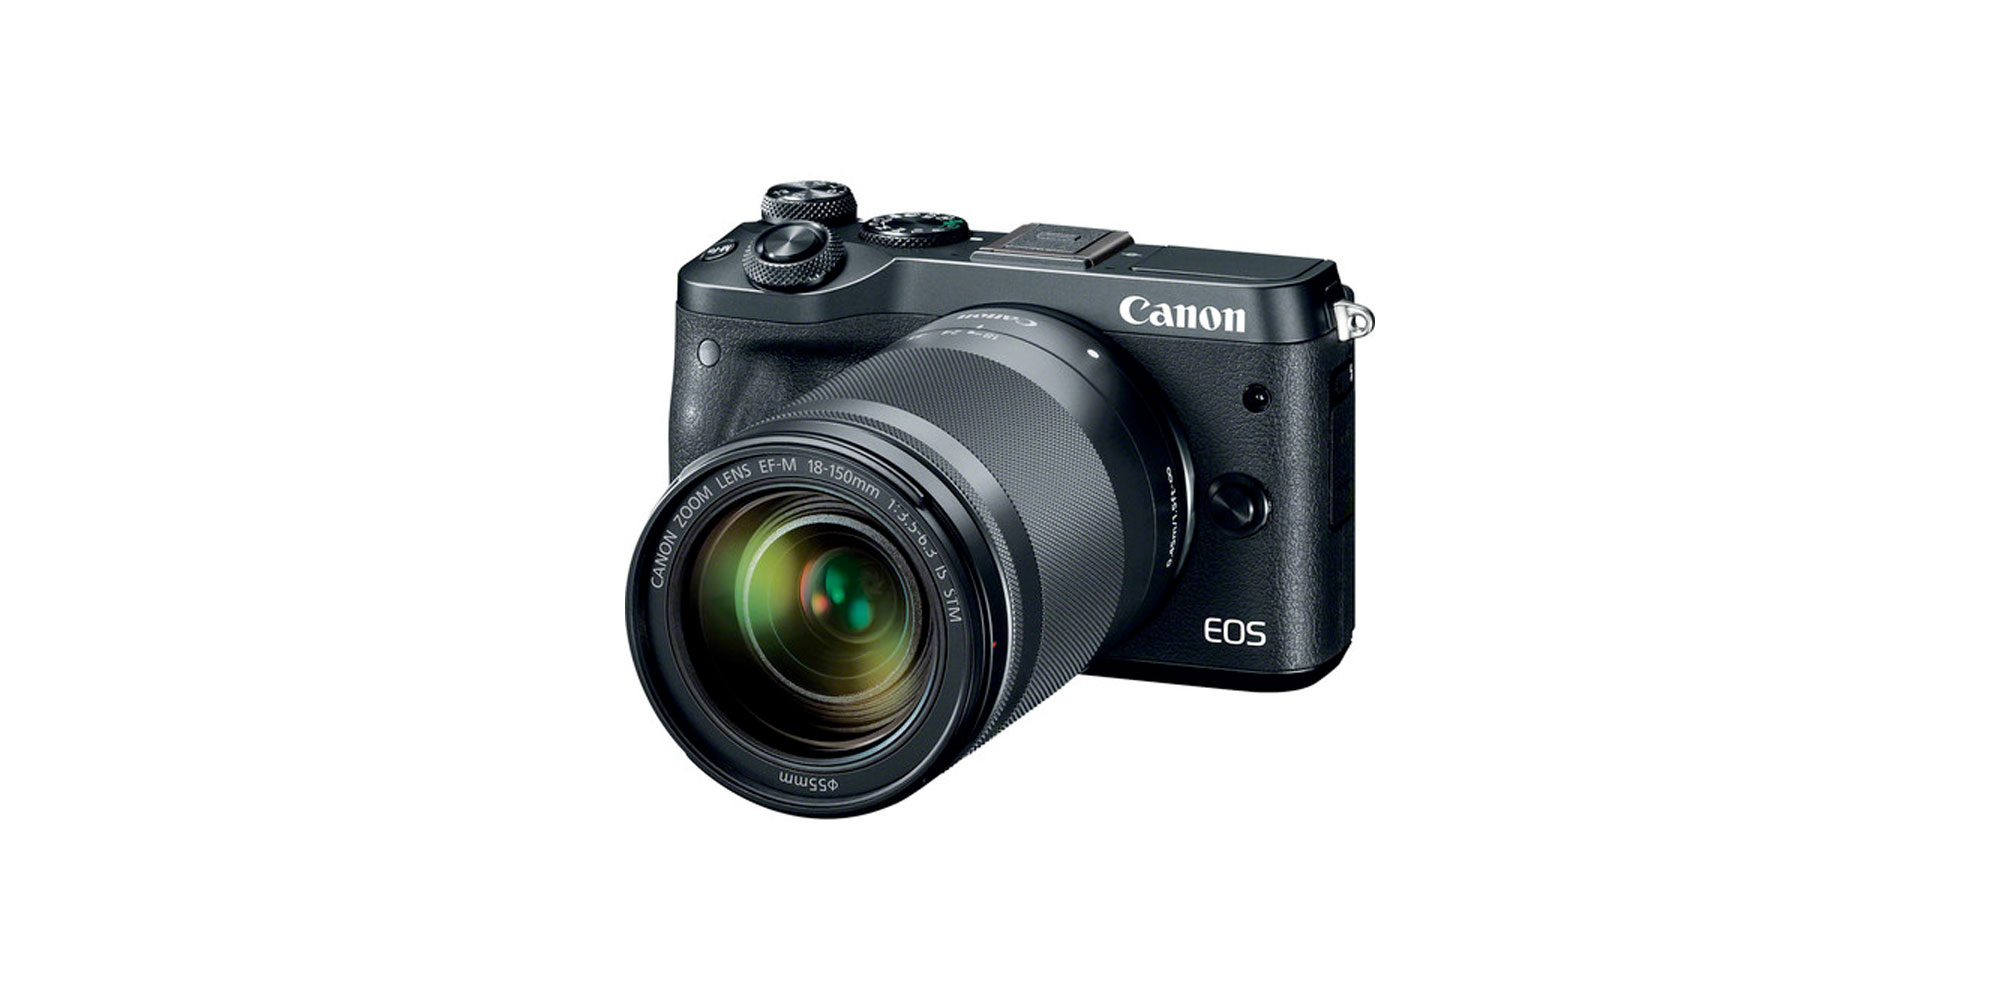 Save 730 On Canon S Eos M6 Camera 18 150mm Lens Now 449 At B H 9to5toys